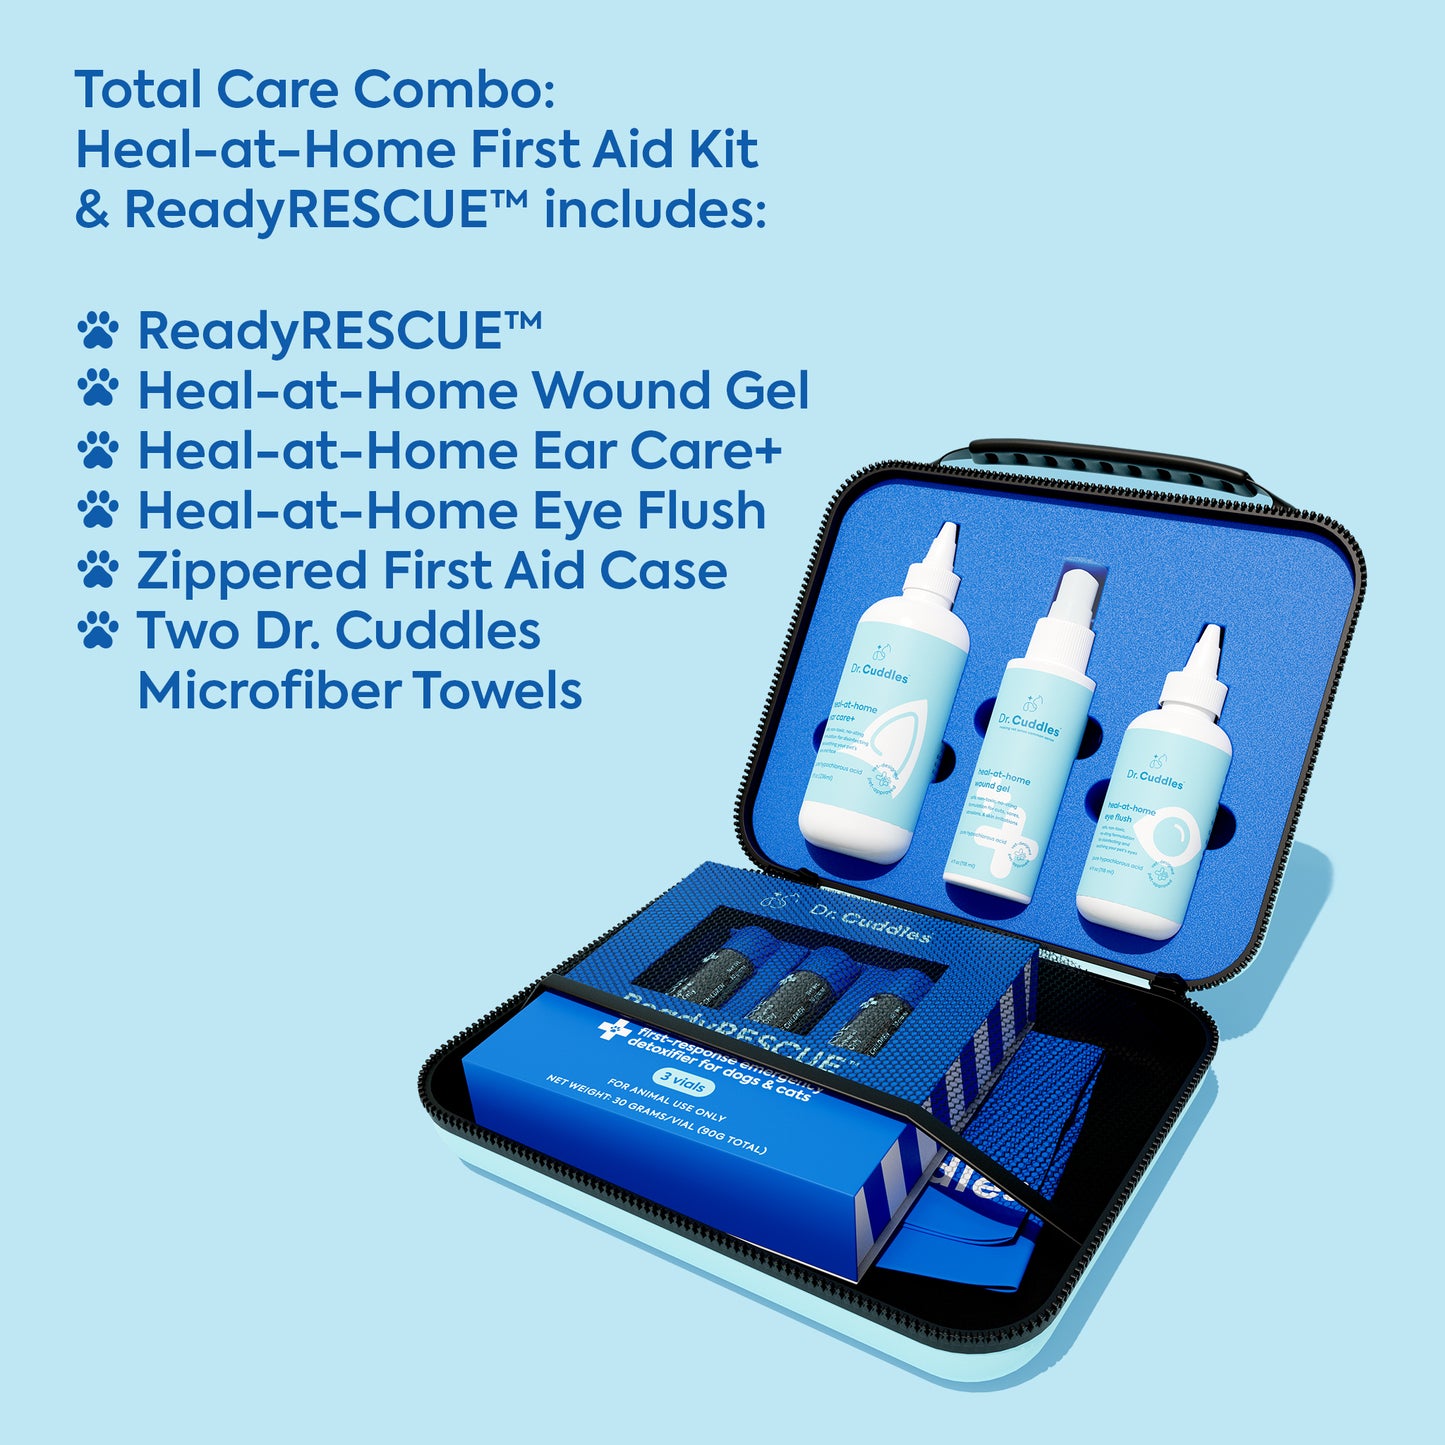 Total care combo: Heal-at-home first aid kit & ReadyRESCUE™